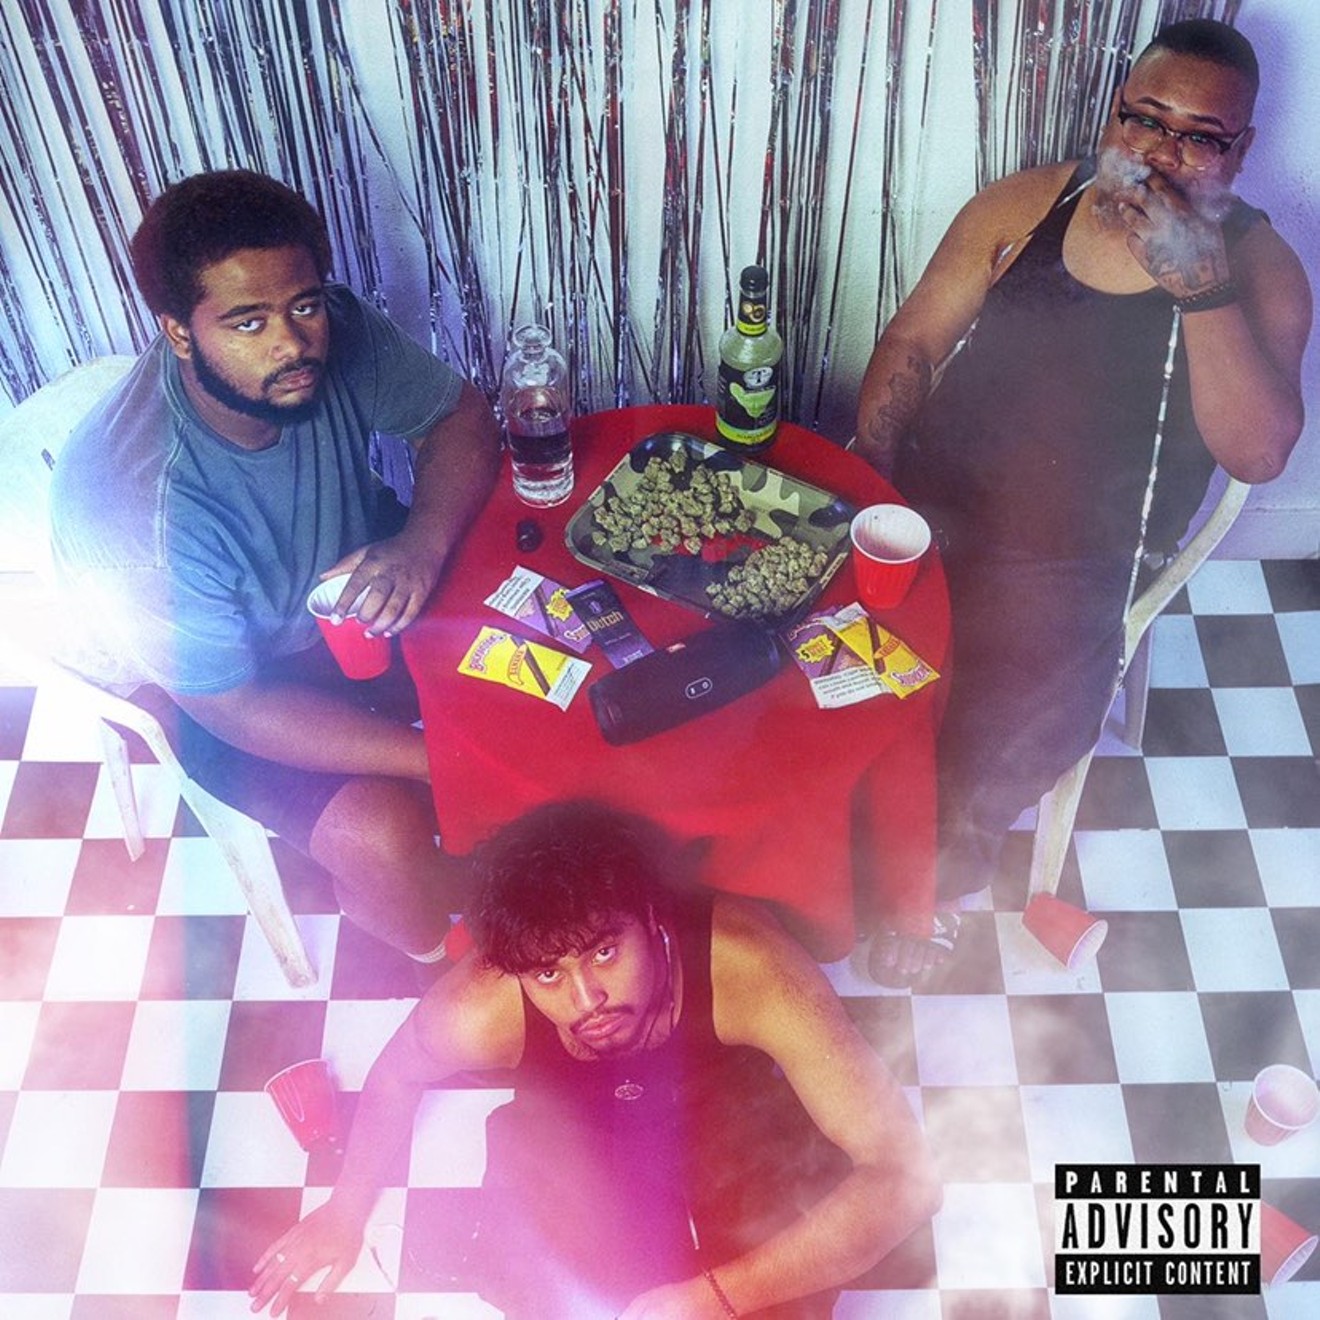 Aurora-based rap trio A$cension just dropped its second EP, The Party Pack.